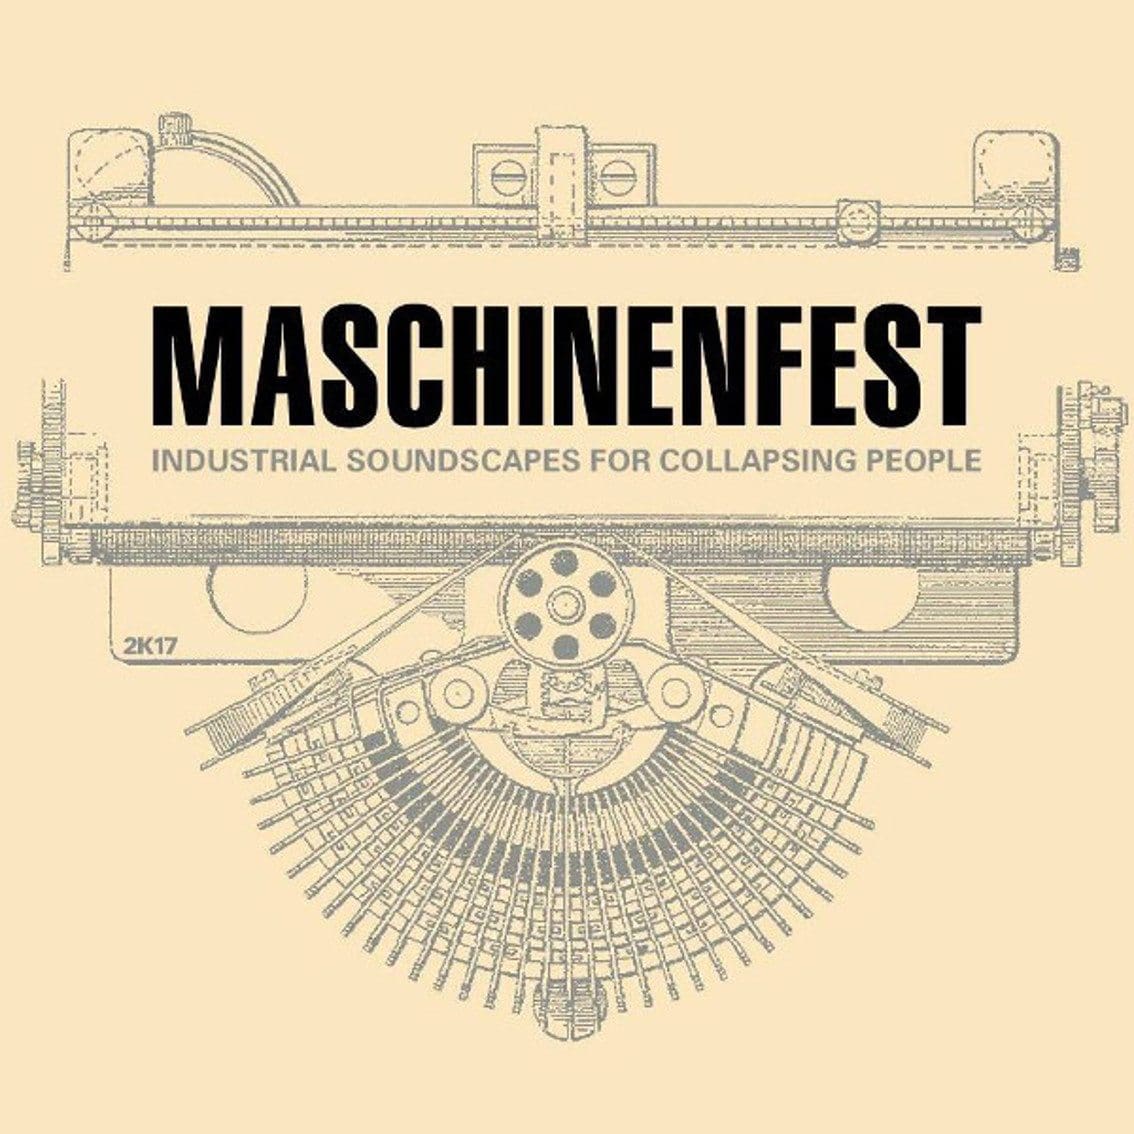 Maschinenfest 2017 compiled and available in a few weeks from now